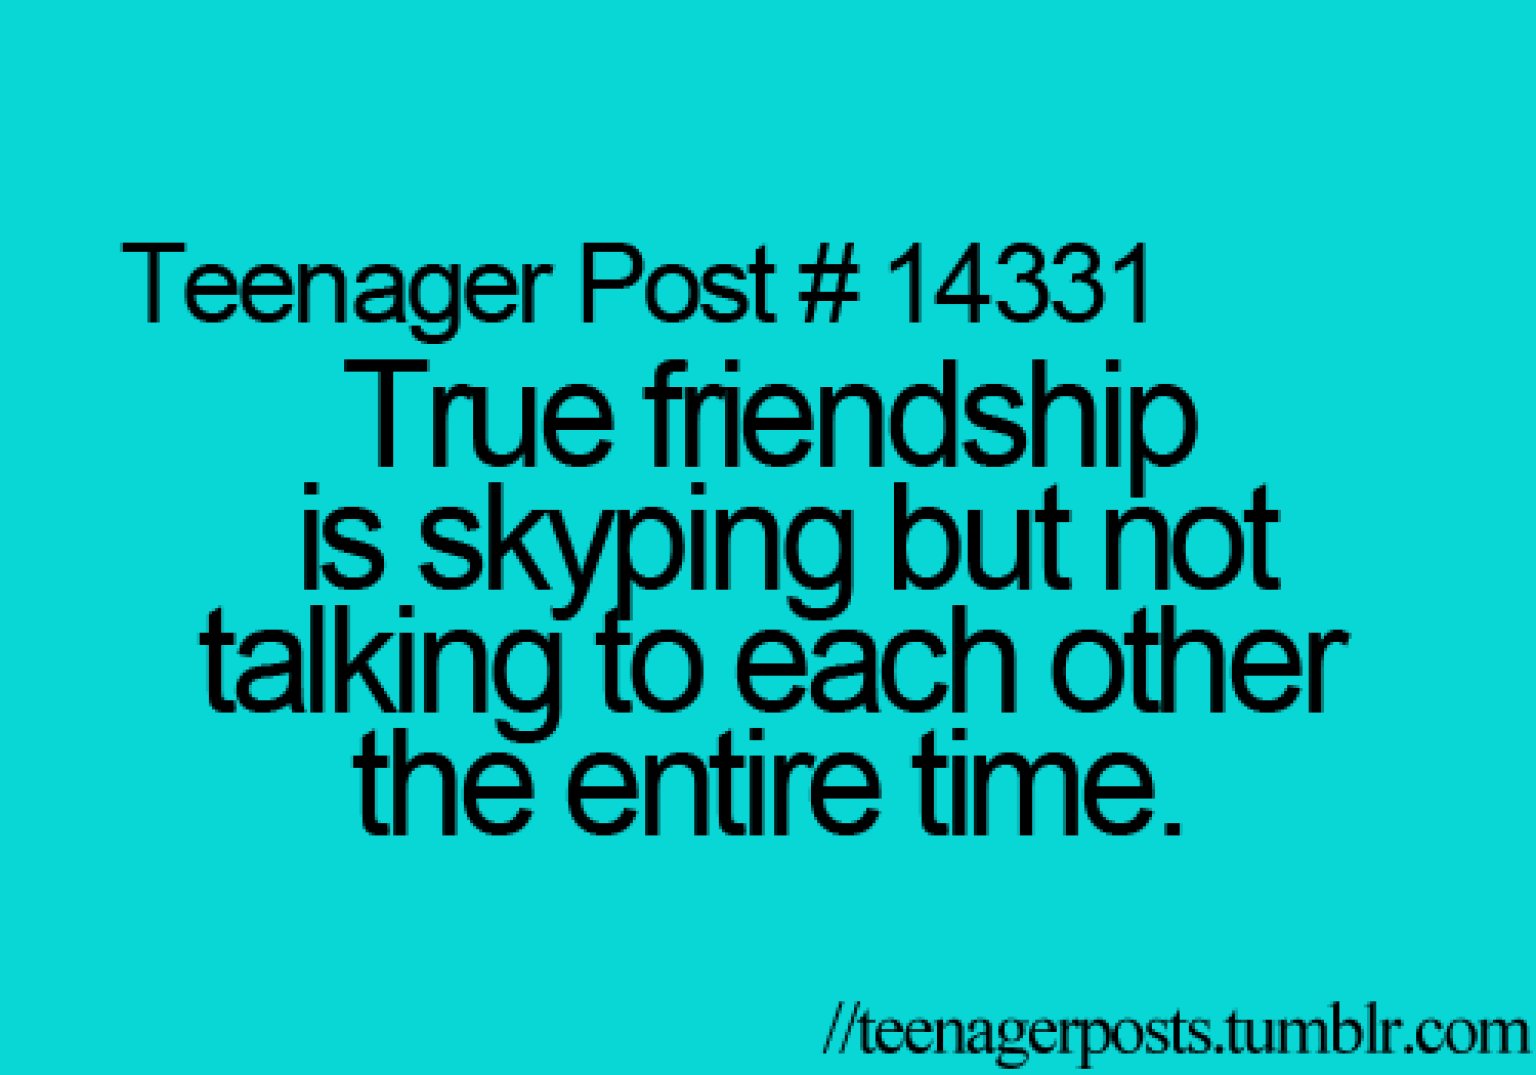 Teenager Posts The Week The True Definition Friendship And Fantasizing About Sleep